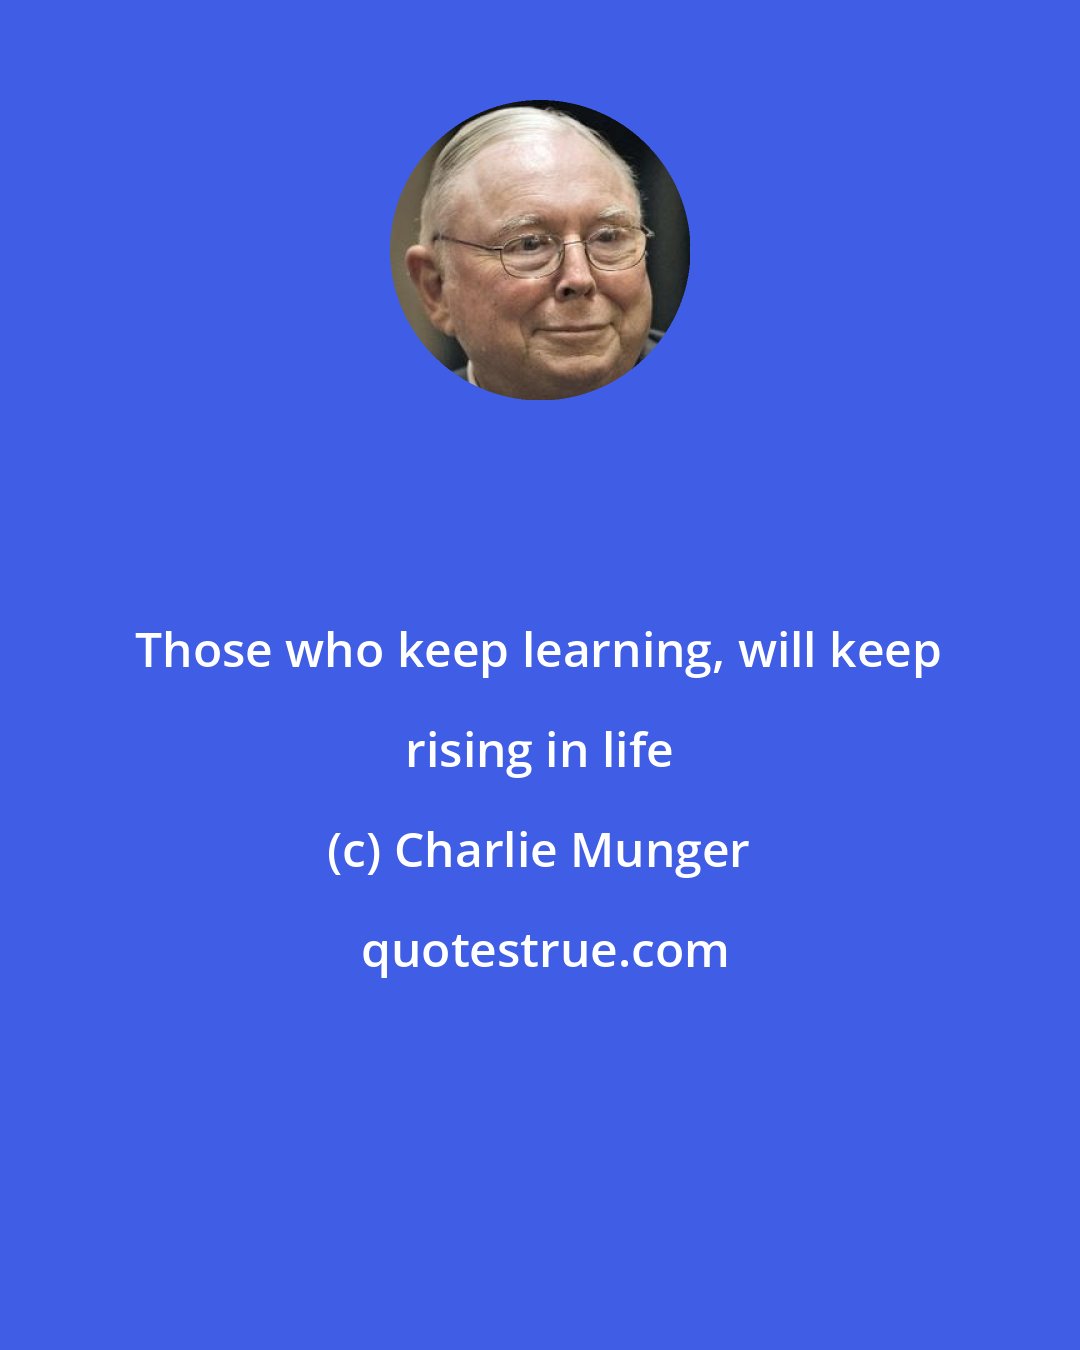 Charlie Munger: Those who keep learning, will keep rising in life